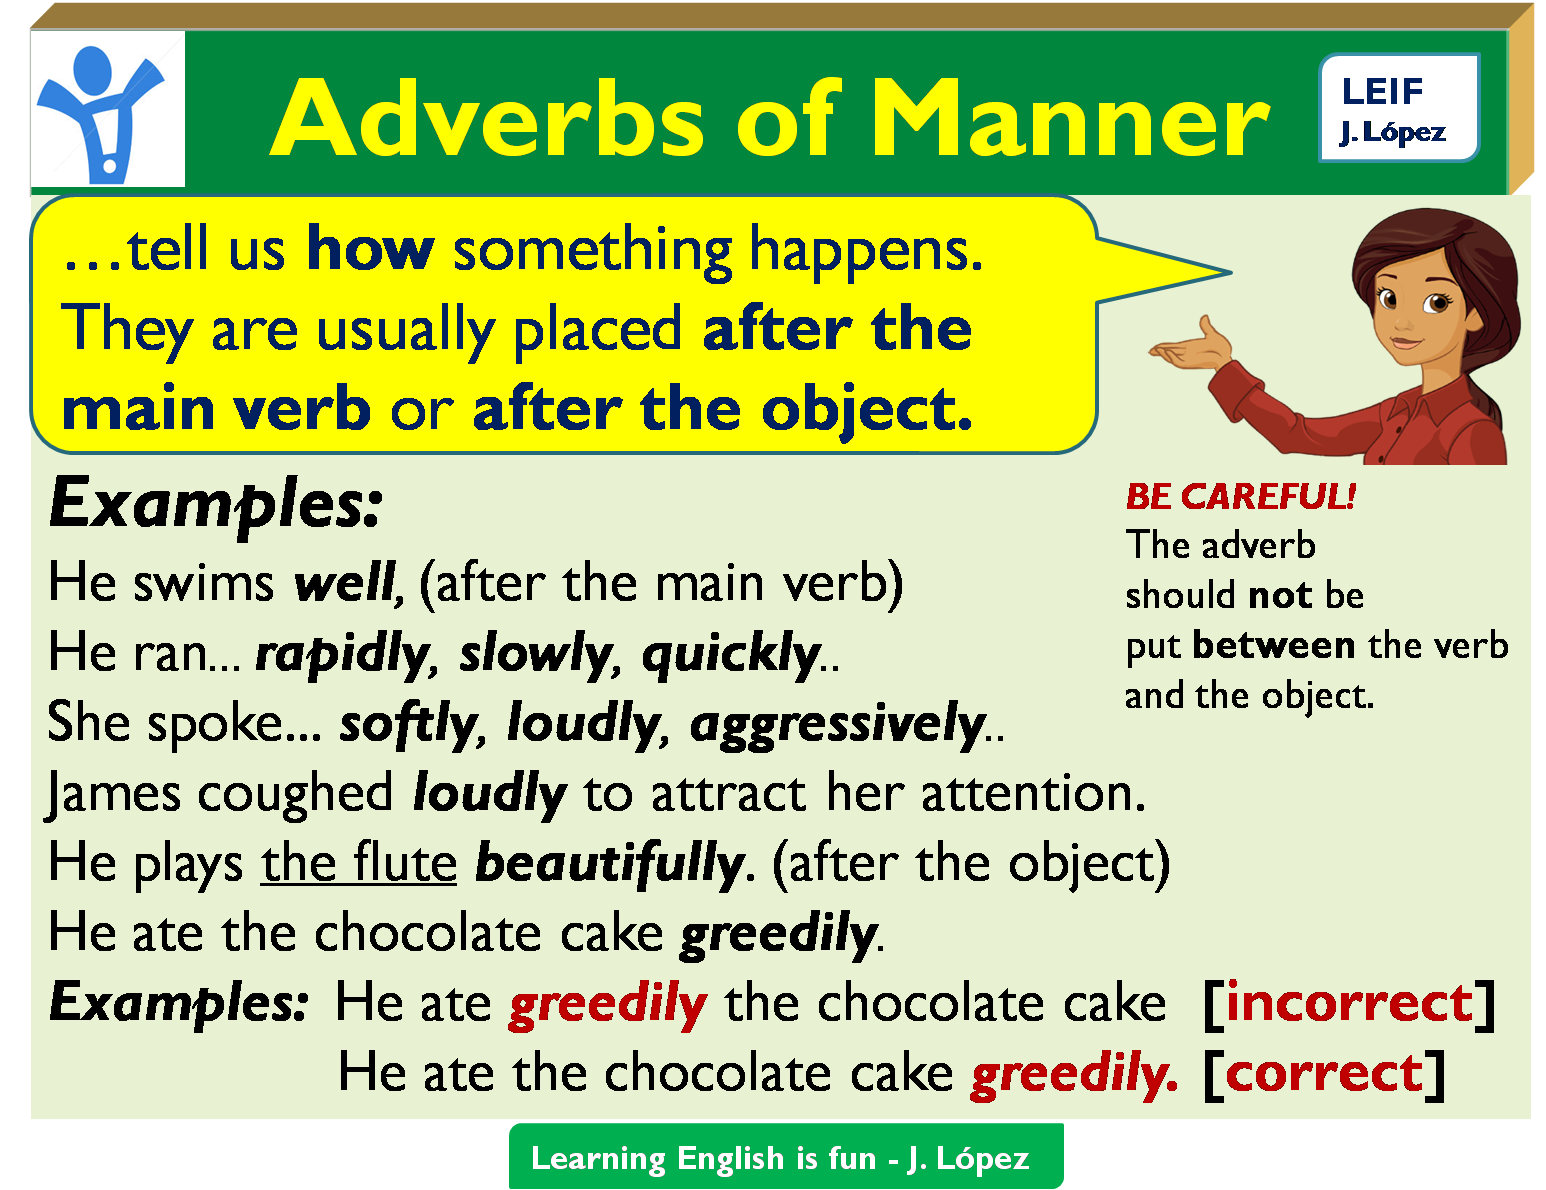 Adverbs slowly. Adverbs of manner. Adverbs of manner правило. Adjectives adverbs of manner. Adverbs of manner таблица.